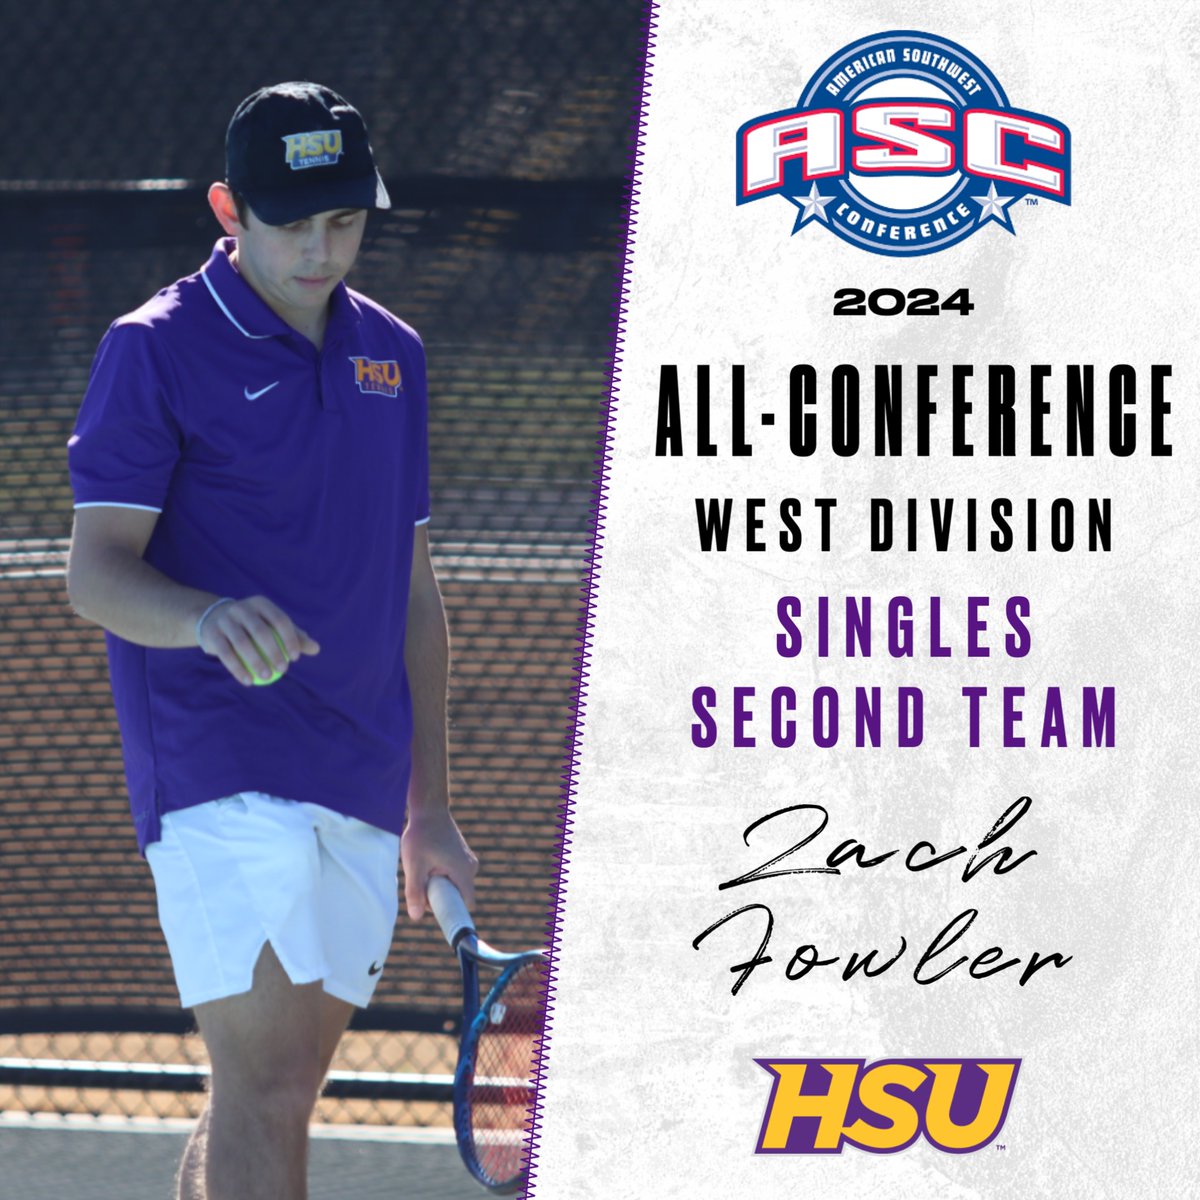 Congrats to Zach Fowler for being named to the ASC West Singles Second Team! 🤠